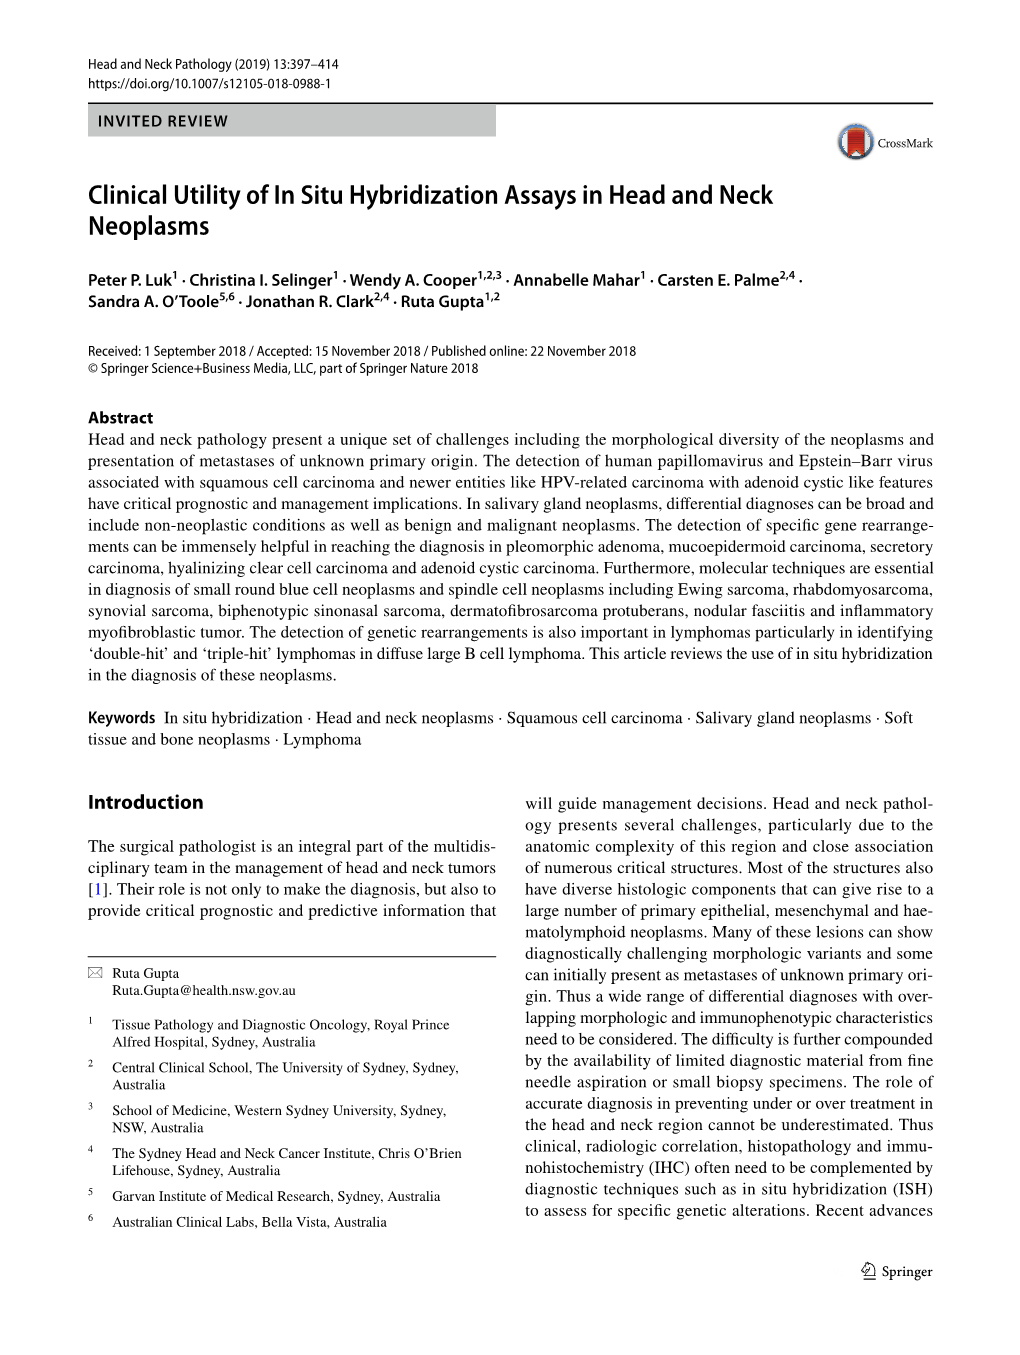 Clinical Utility of in Situ Hybridization Assays in Head and Neck Neoplasms